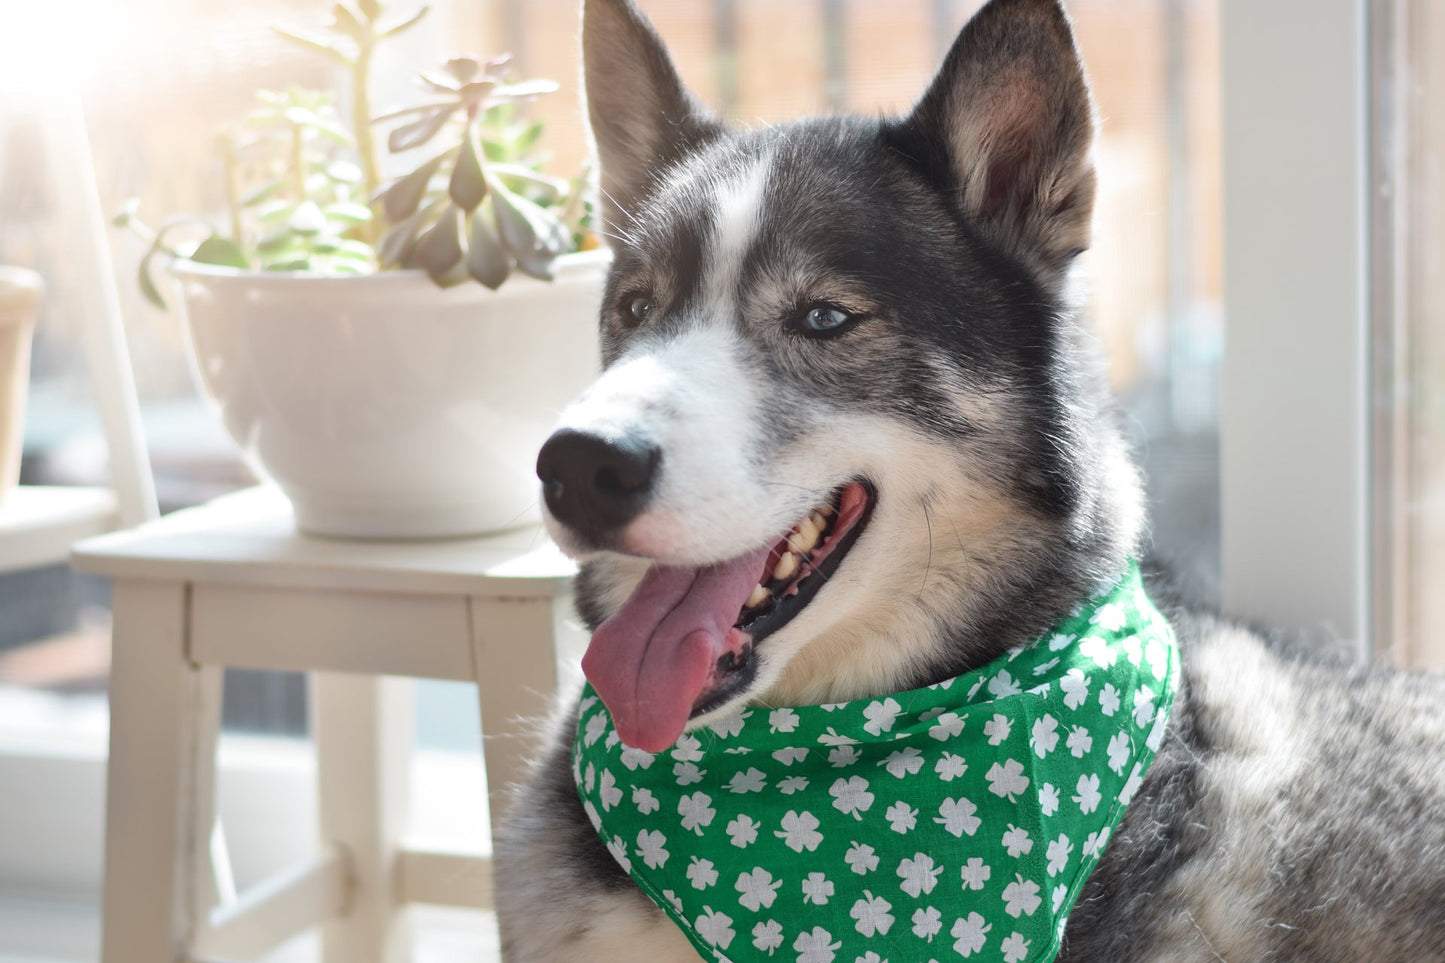 A TAIL-WAGGING GUIDE TO ST. PATRICK’S DAY BLISS FOR YOUR DOG